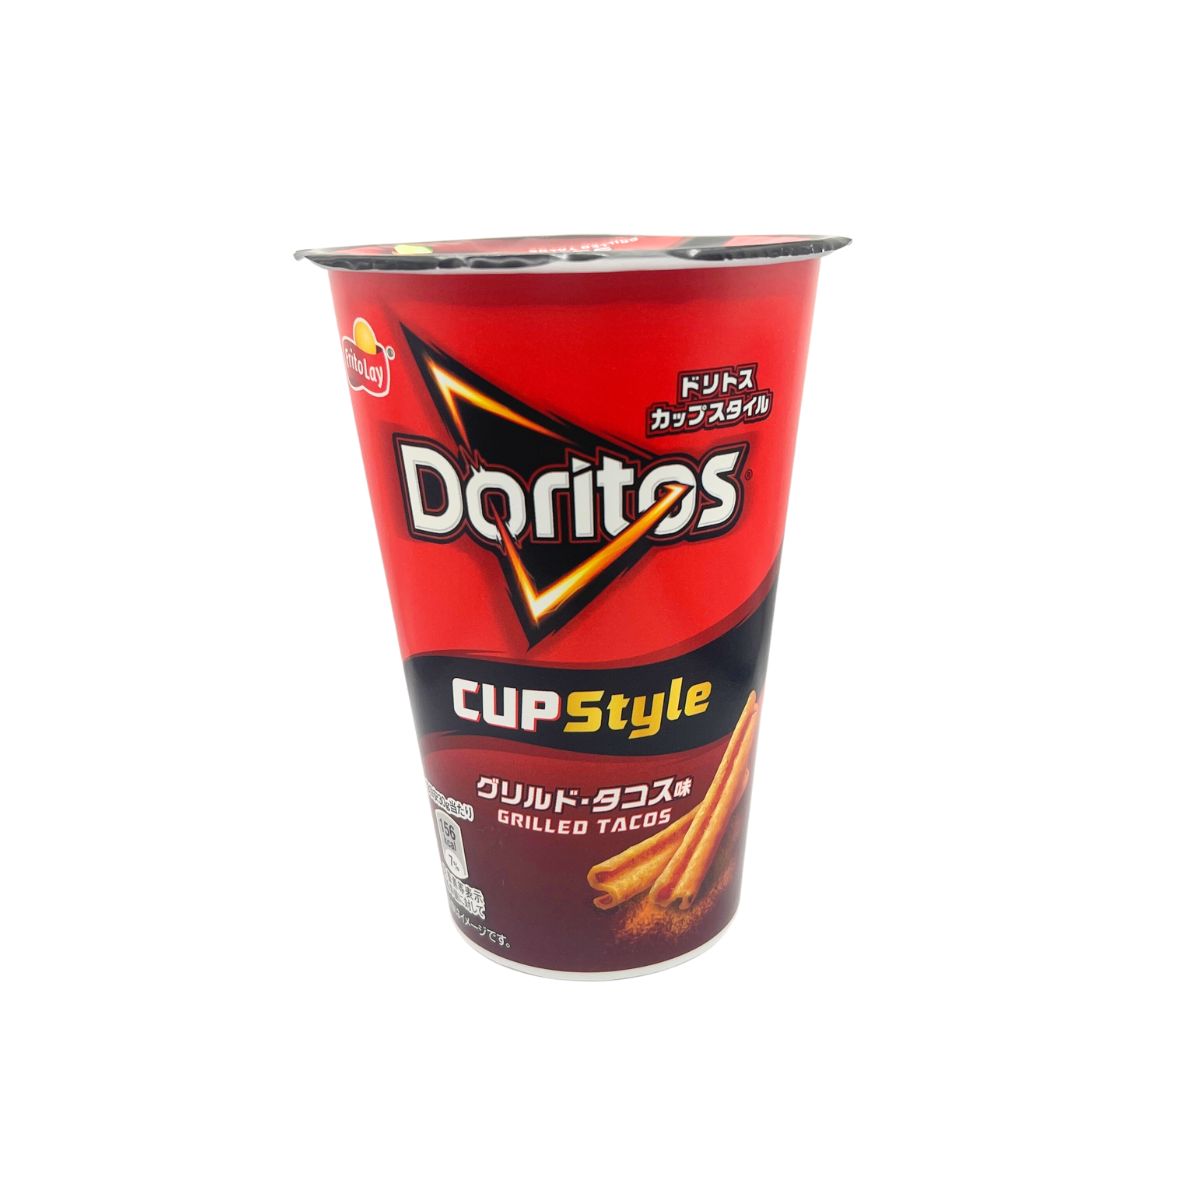 Doritos CupStyle Grilled Tacos